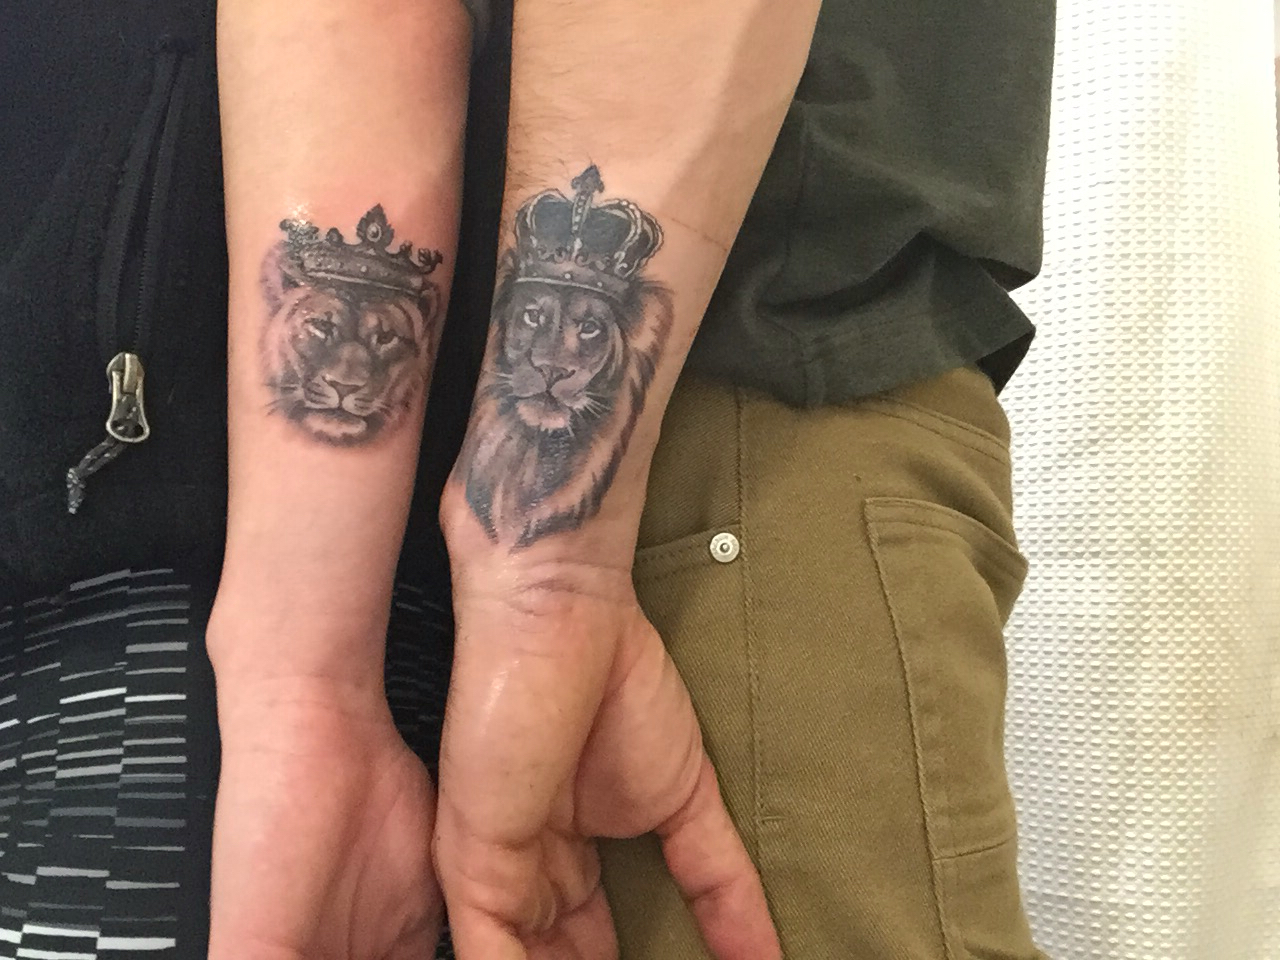 Pictures of Matching Lion Tattoos.